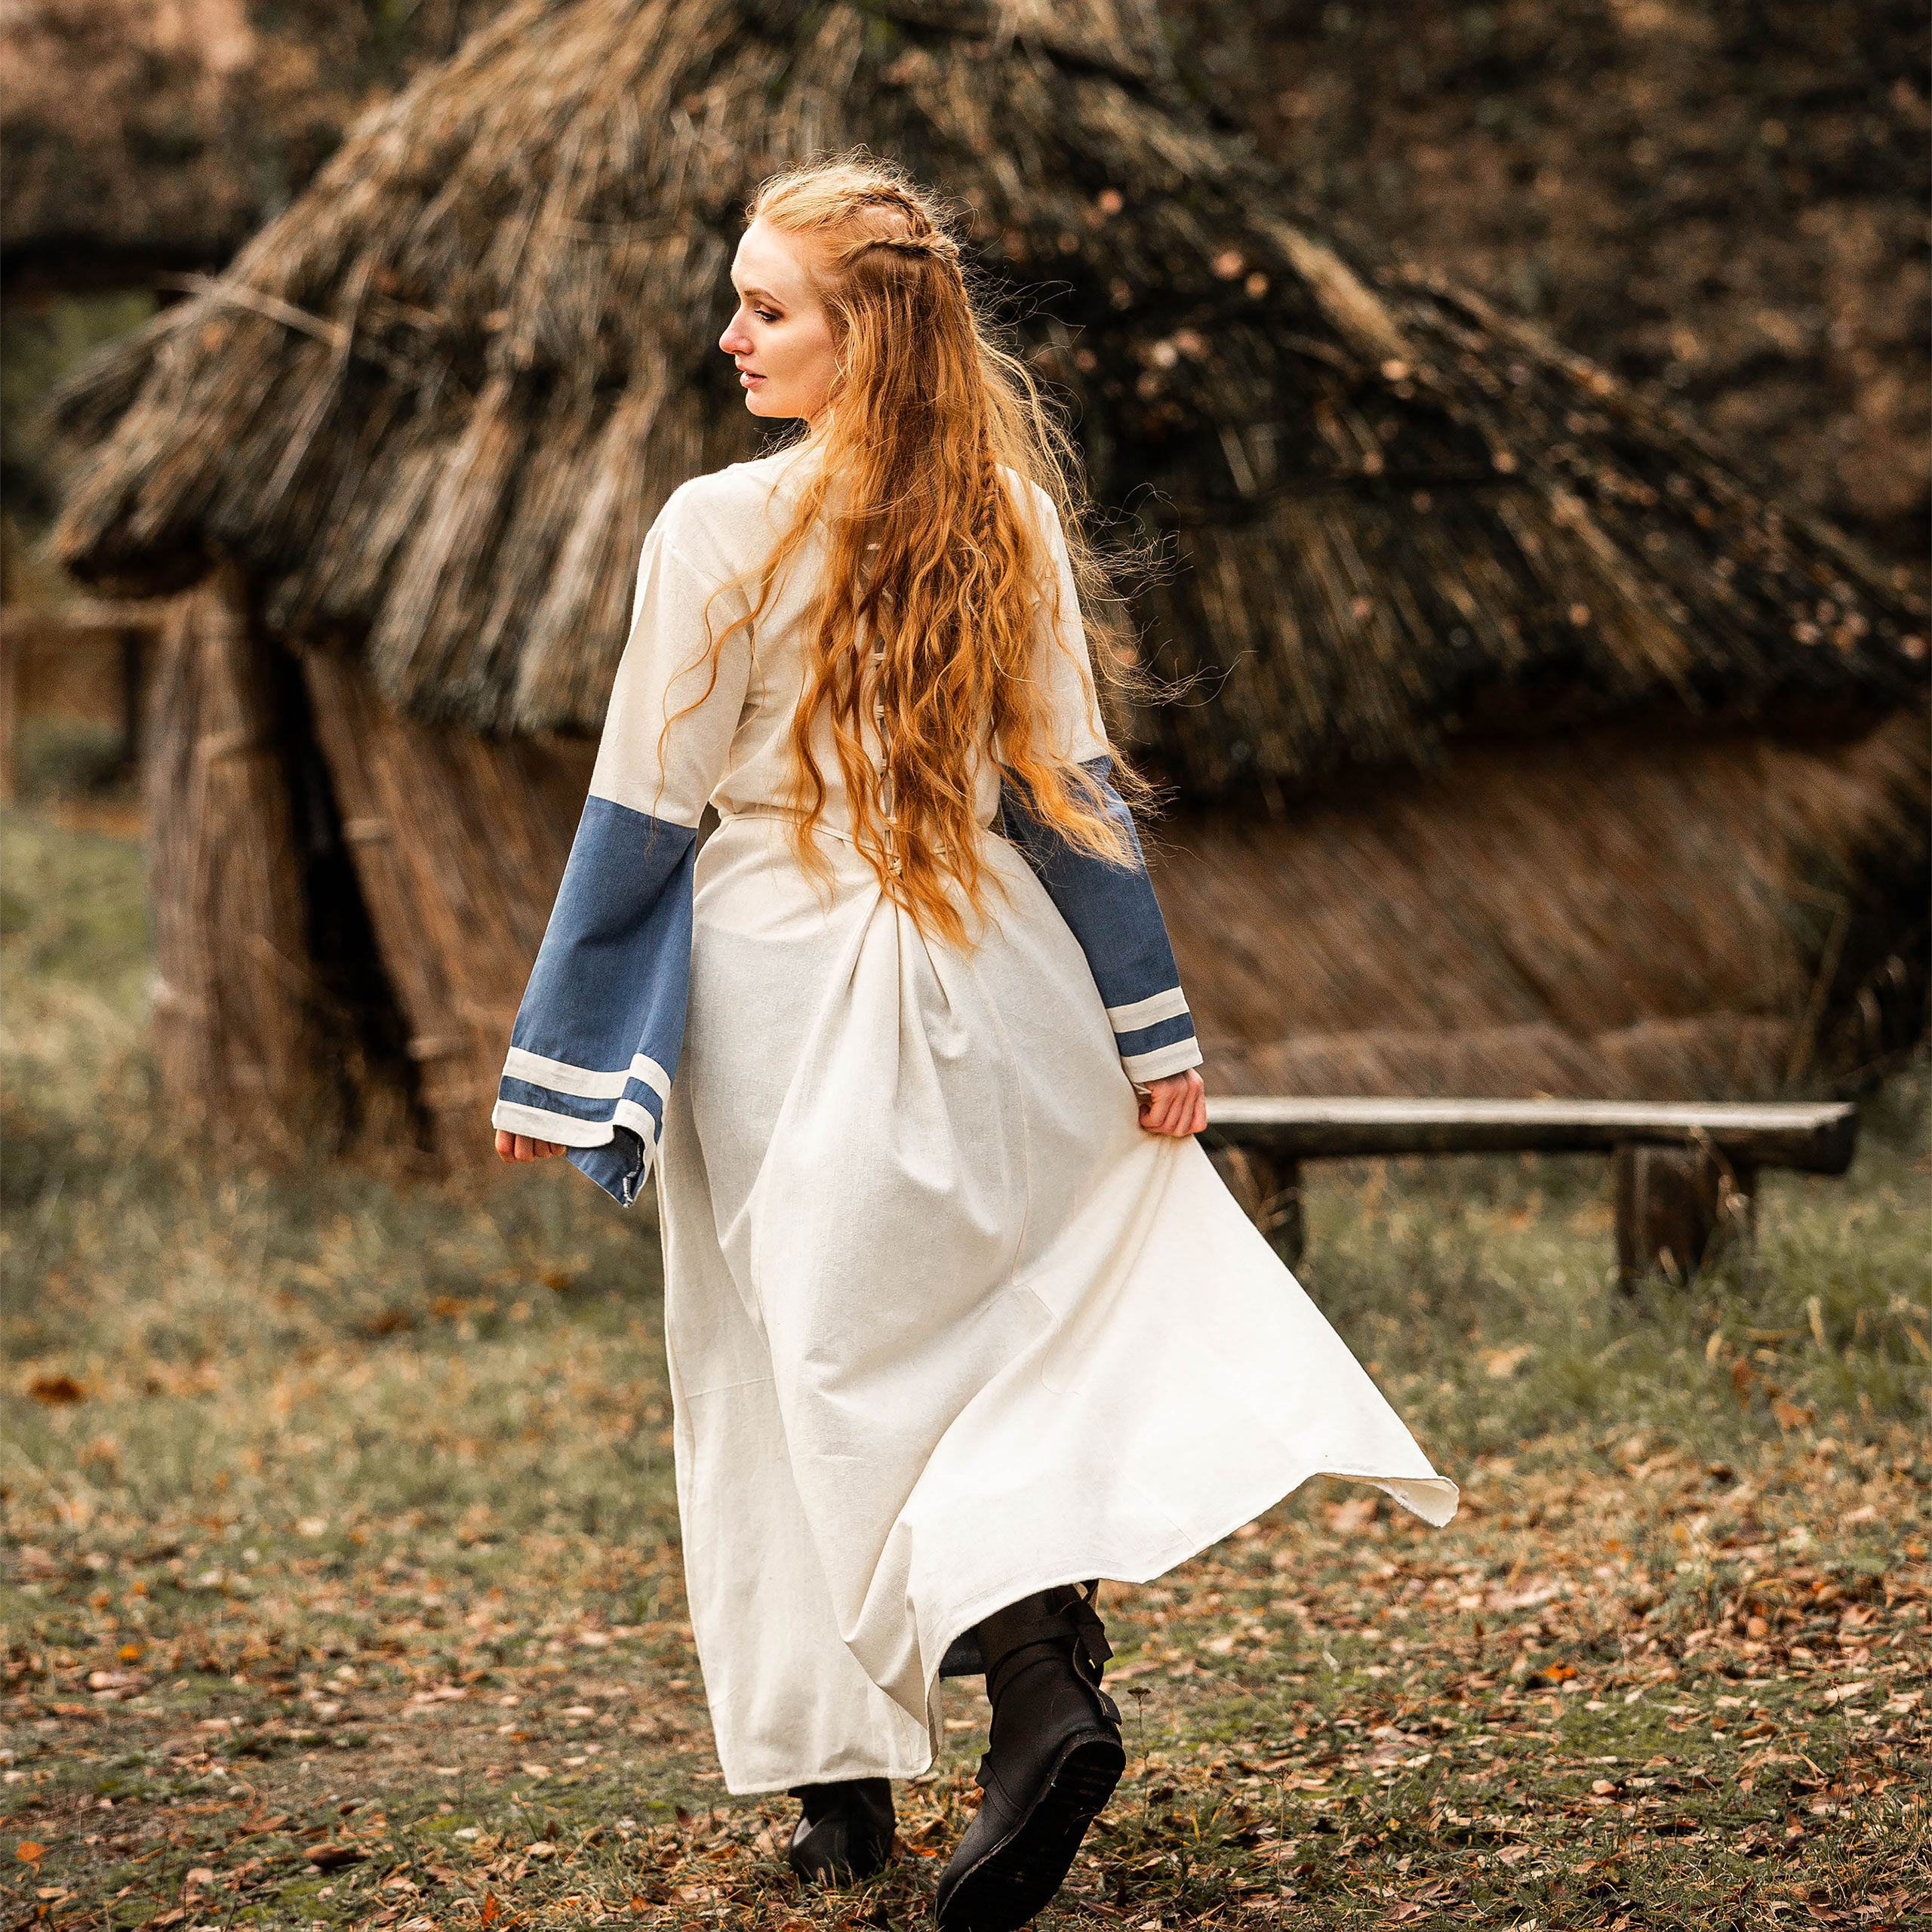 Medieval dress with trumpet sleeves blue-natural